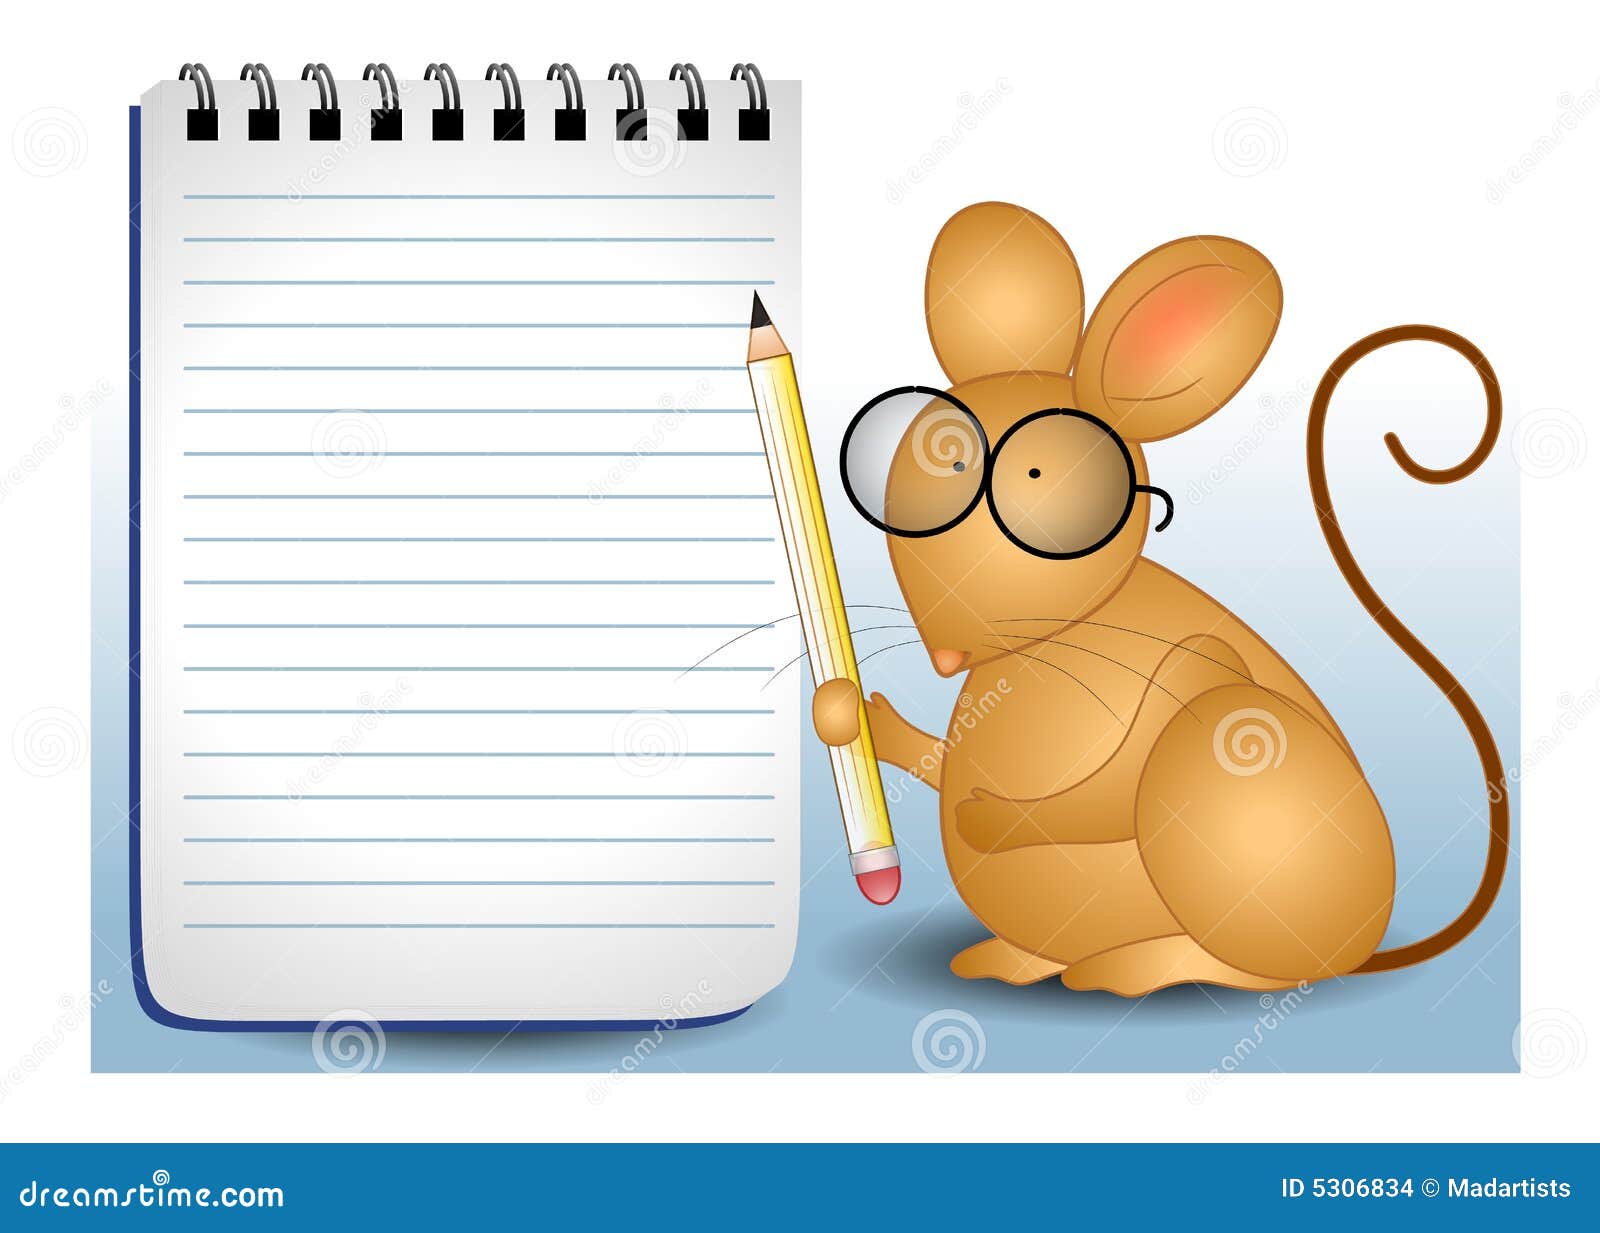 mouse pencil and notebook